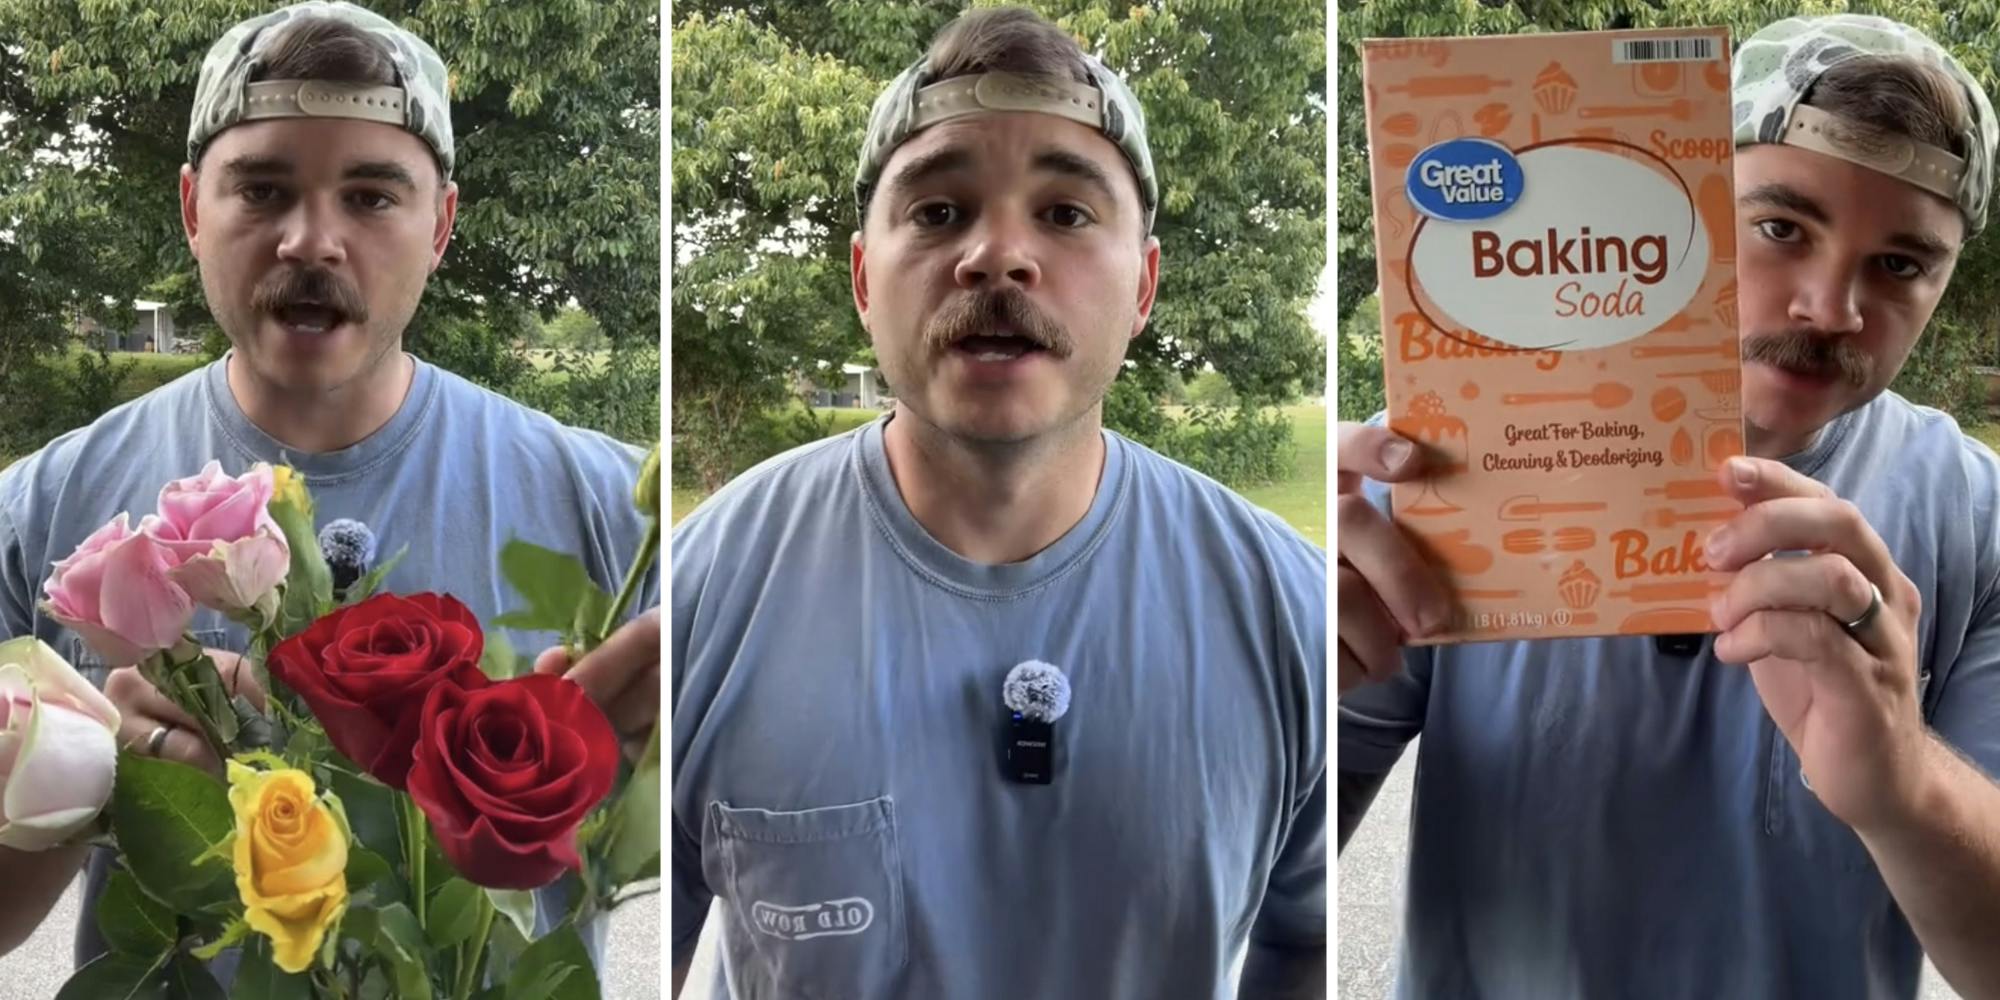 ‘Is there anything baking soda CAN’T do?!?’: Man shares how to keep flowers alive with Great Value baking soda hack